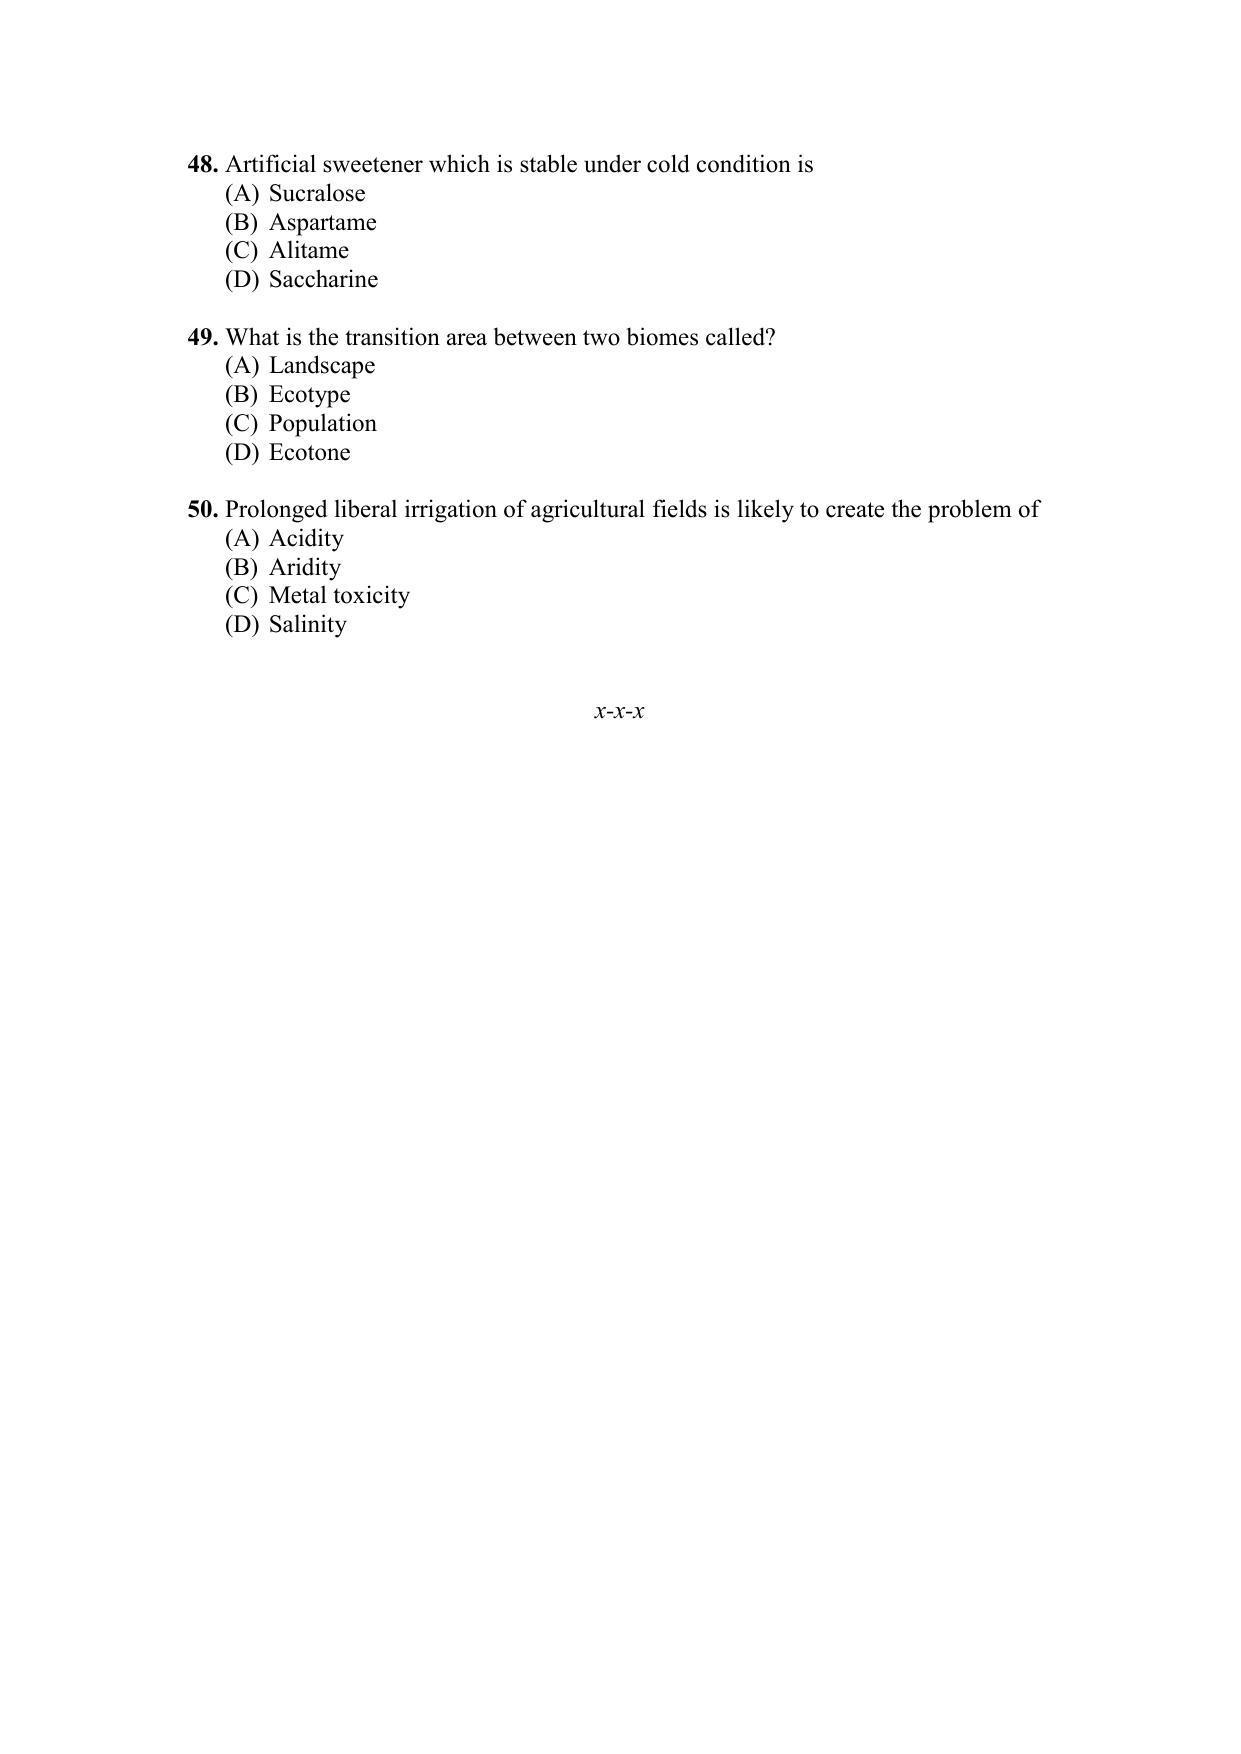 PU MPET Anthropology 2022 Question Papers - Page 30